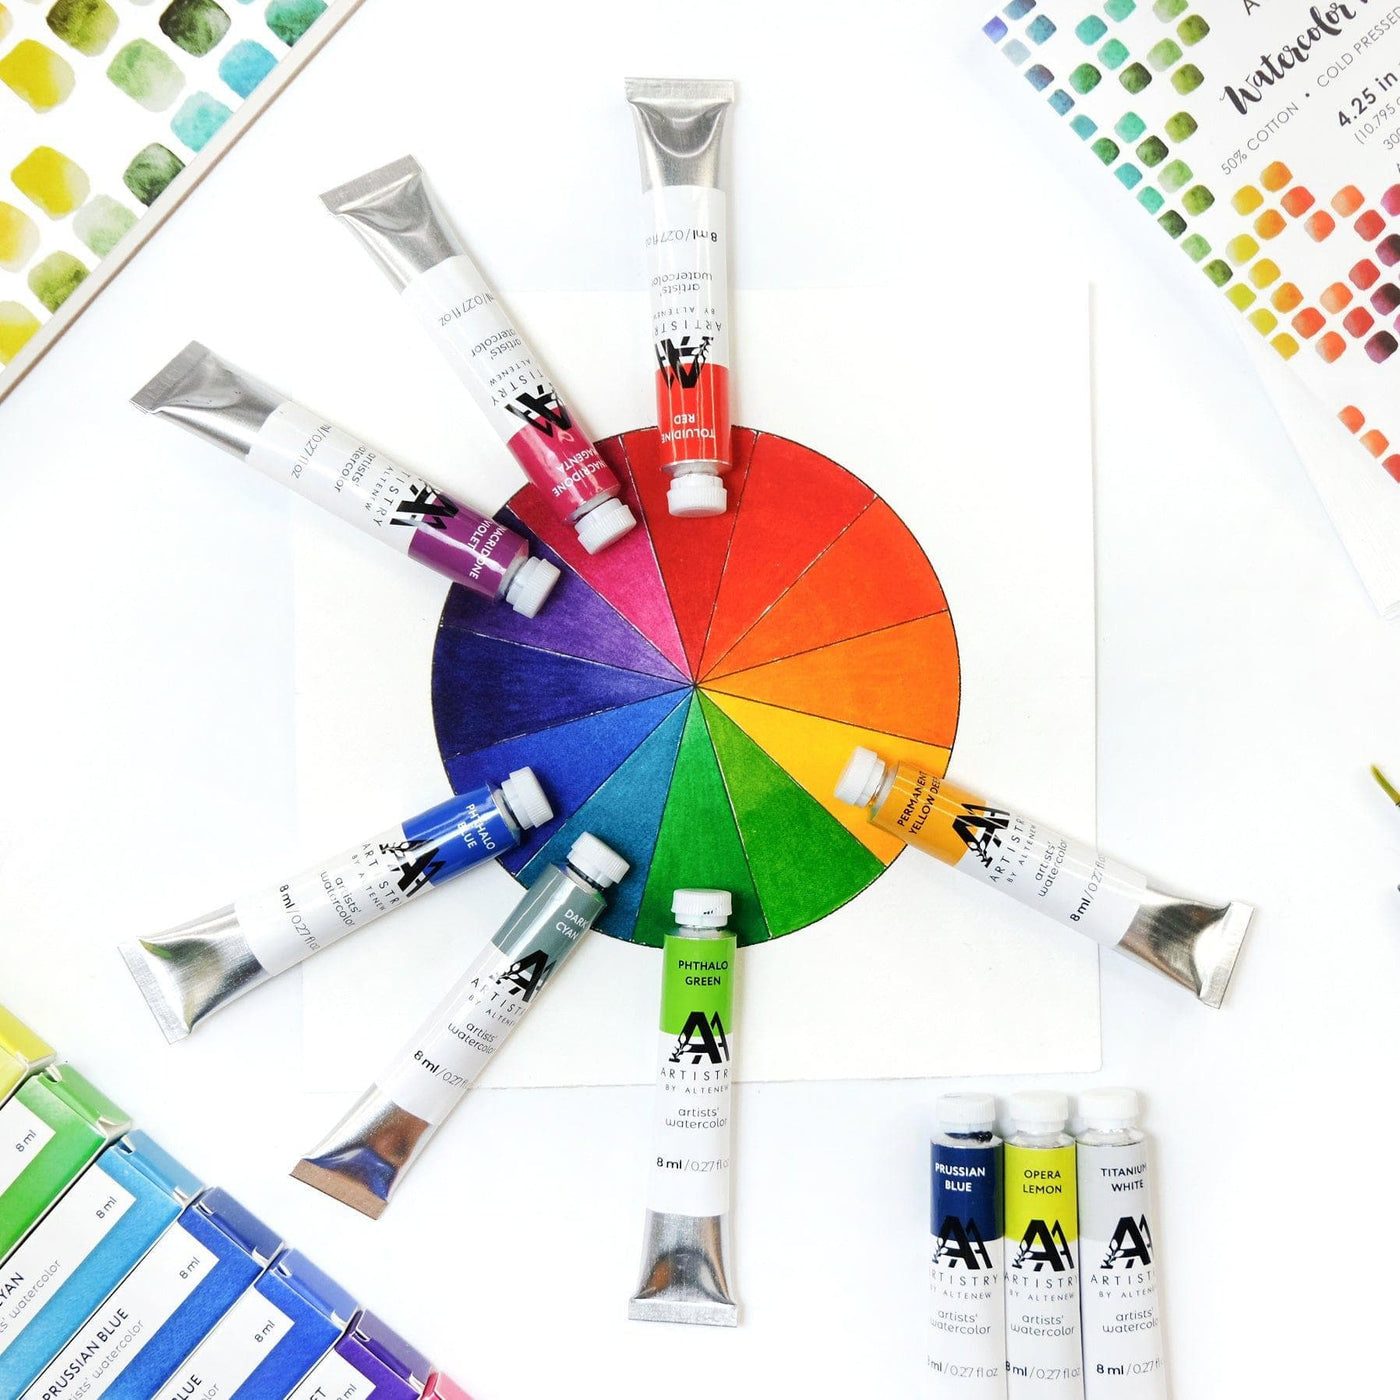 The Artist in You: Painting 101 With Watercolor Tubes